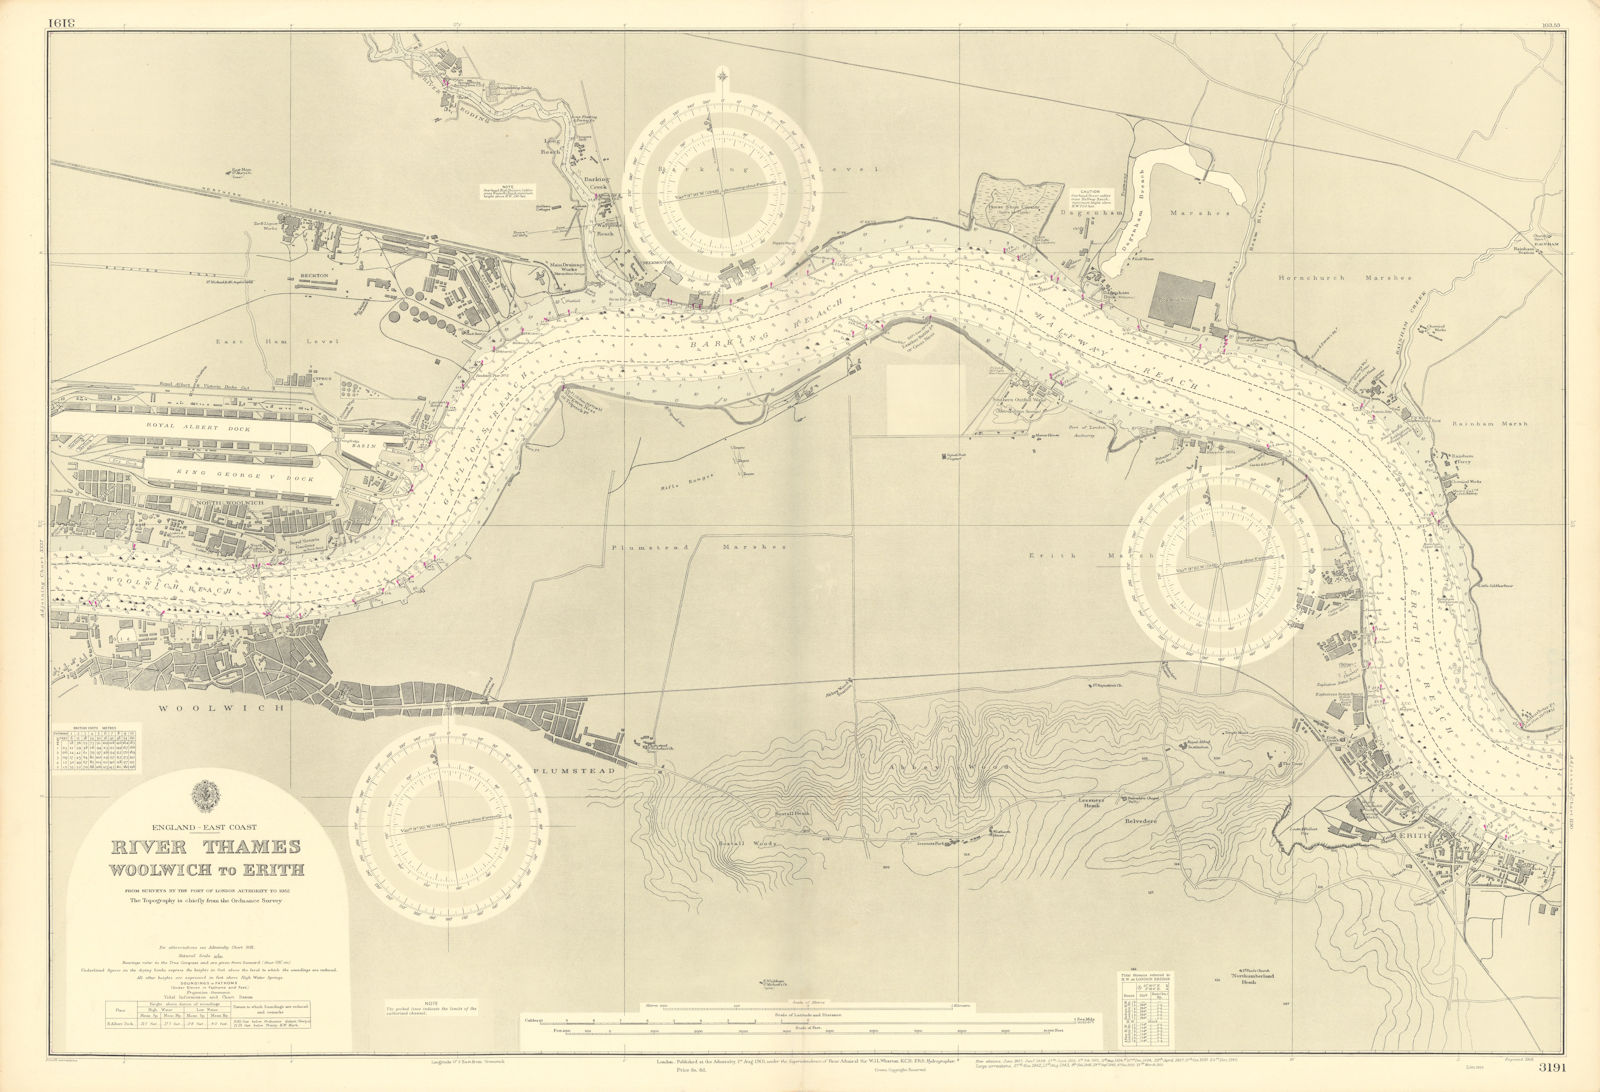 Thames Woolwich-Erith Royal Docks London ADMIRALTY sea chart 1901 (1953) map